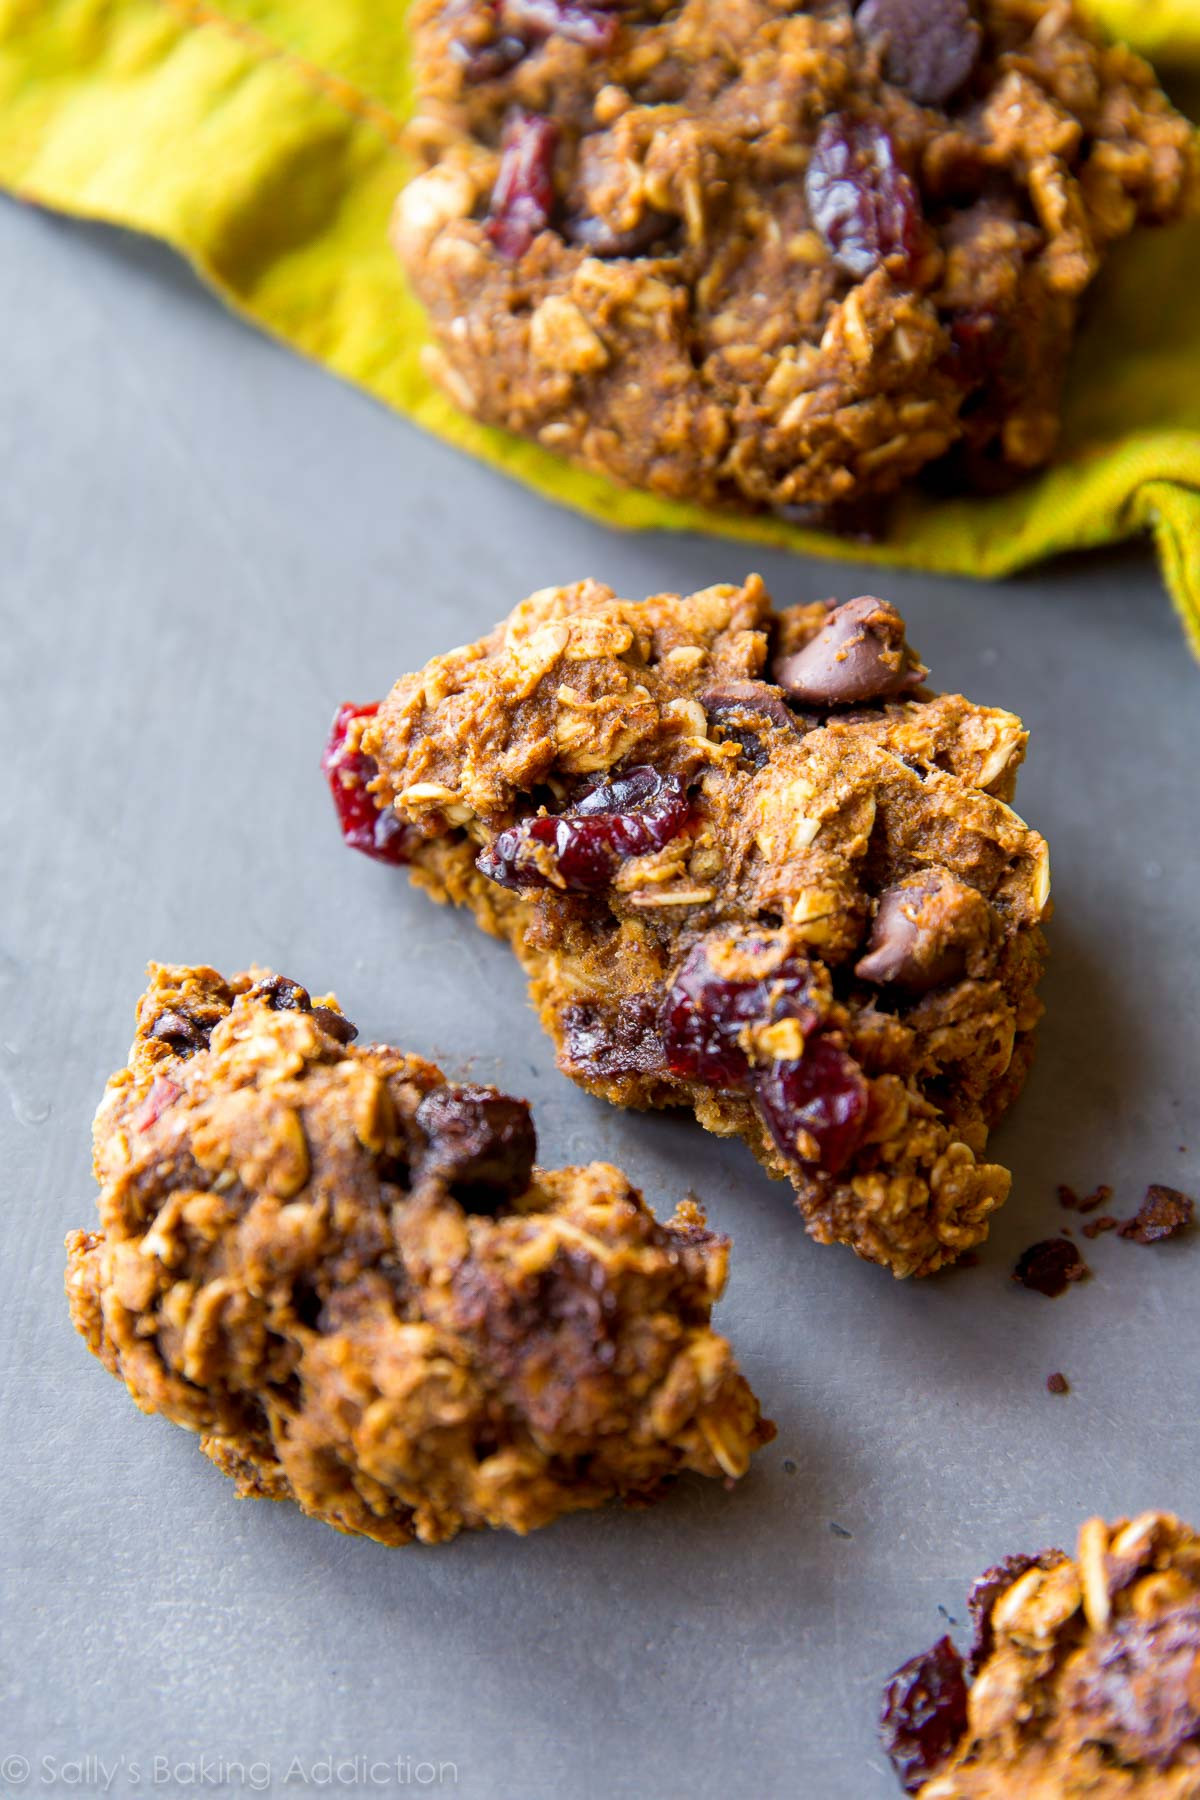 Oatmeal Chocolate Chip Cookies Healthy
 Healthy Pumpkin Chocolate Chip Oatmeal Cookies